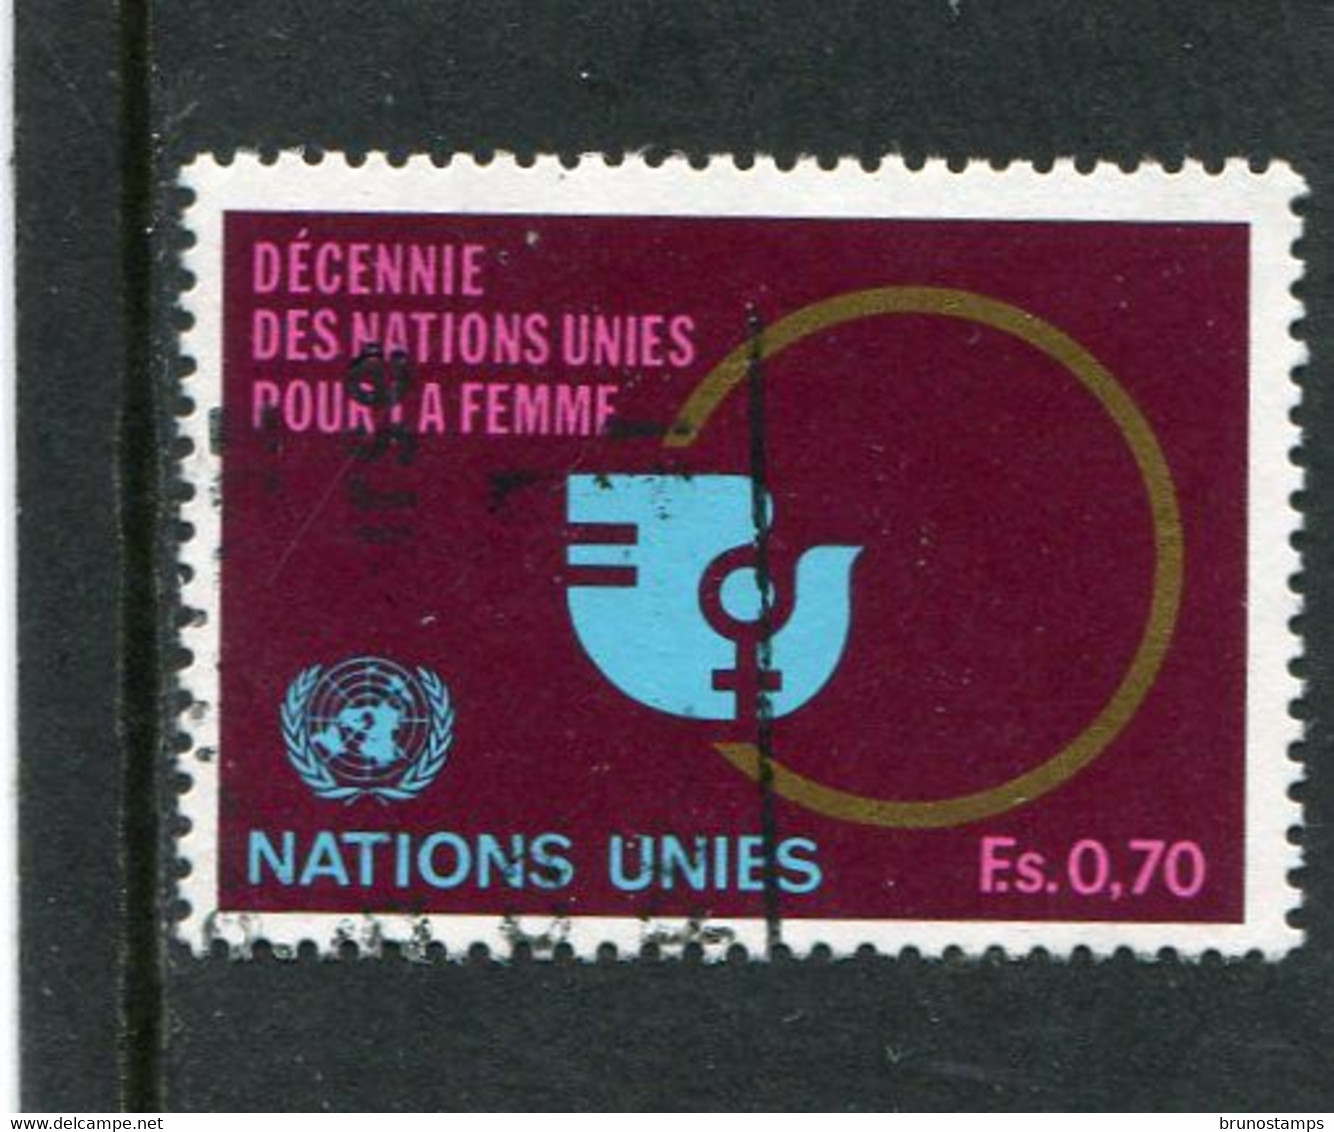 UNITED NATIONS - GENEVE  -  1980  70 C.  UN  FOR WHOMEN  FINE USED - Usados